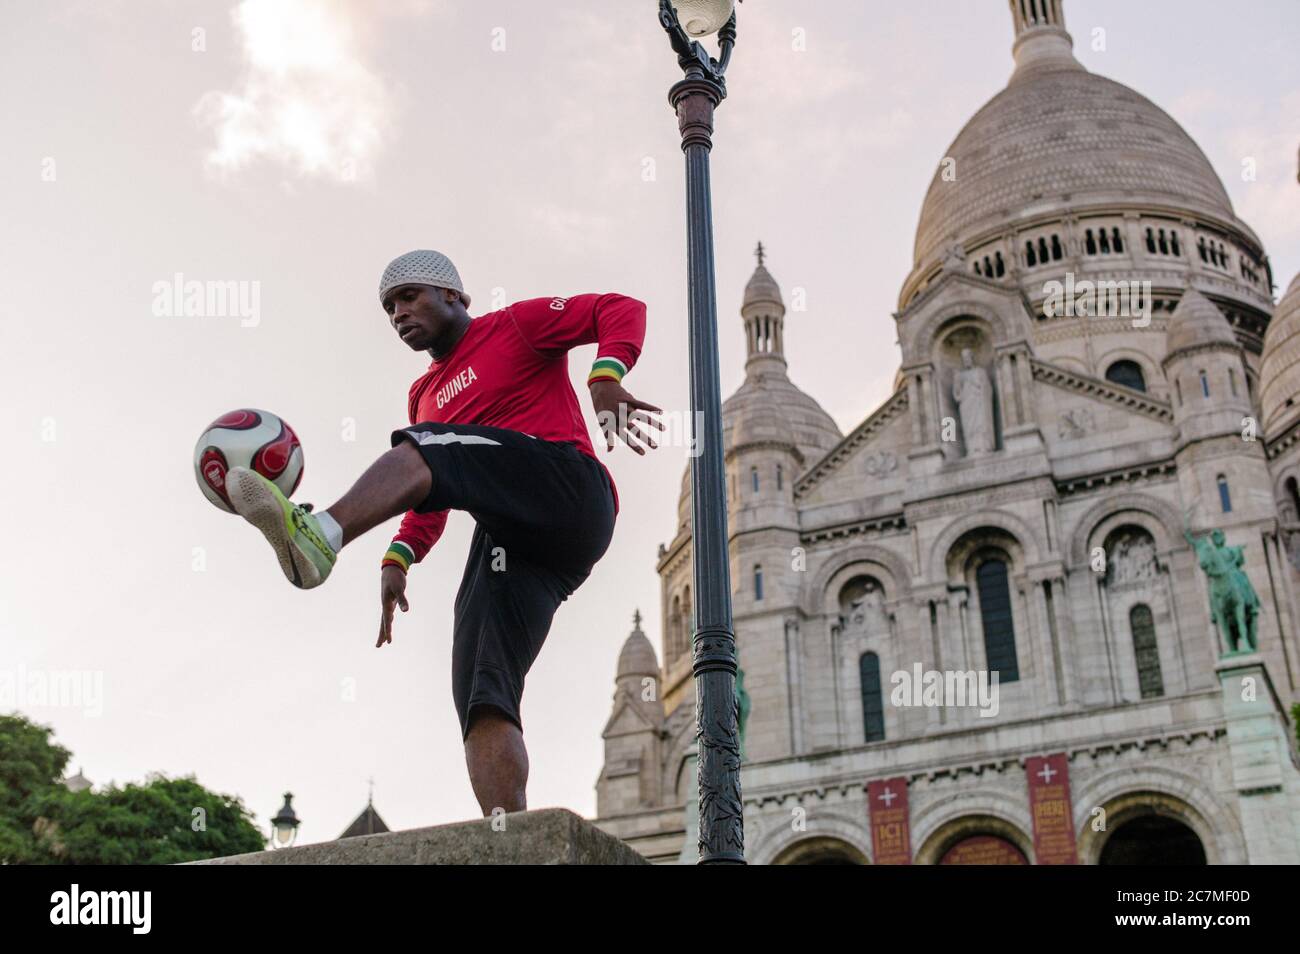 PARIS, FRANCE - Jul 13, 2019: A series of images showing a young man performing a show with his football in front of the Sacre Coeur Church in Montmar Stock Photo